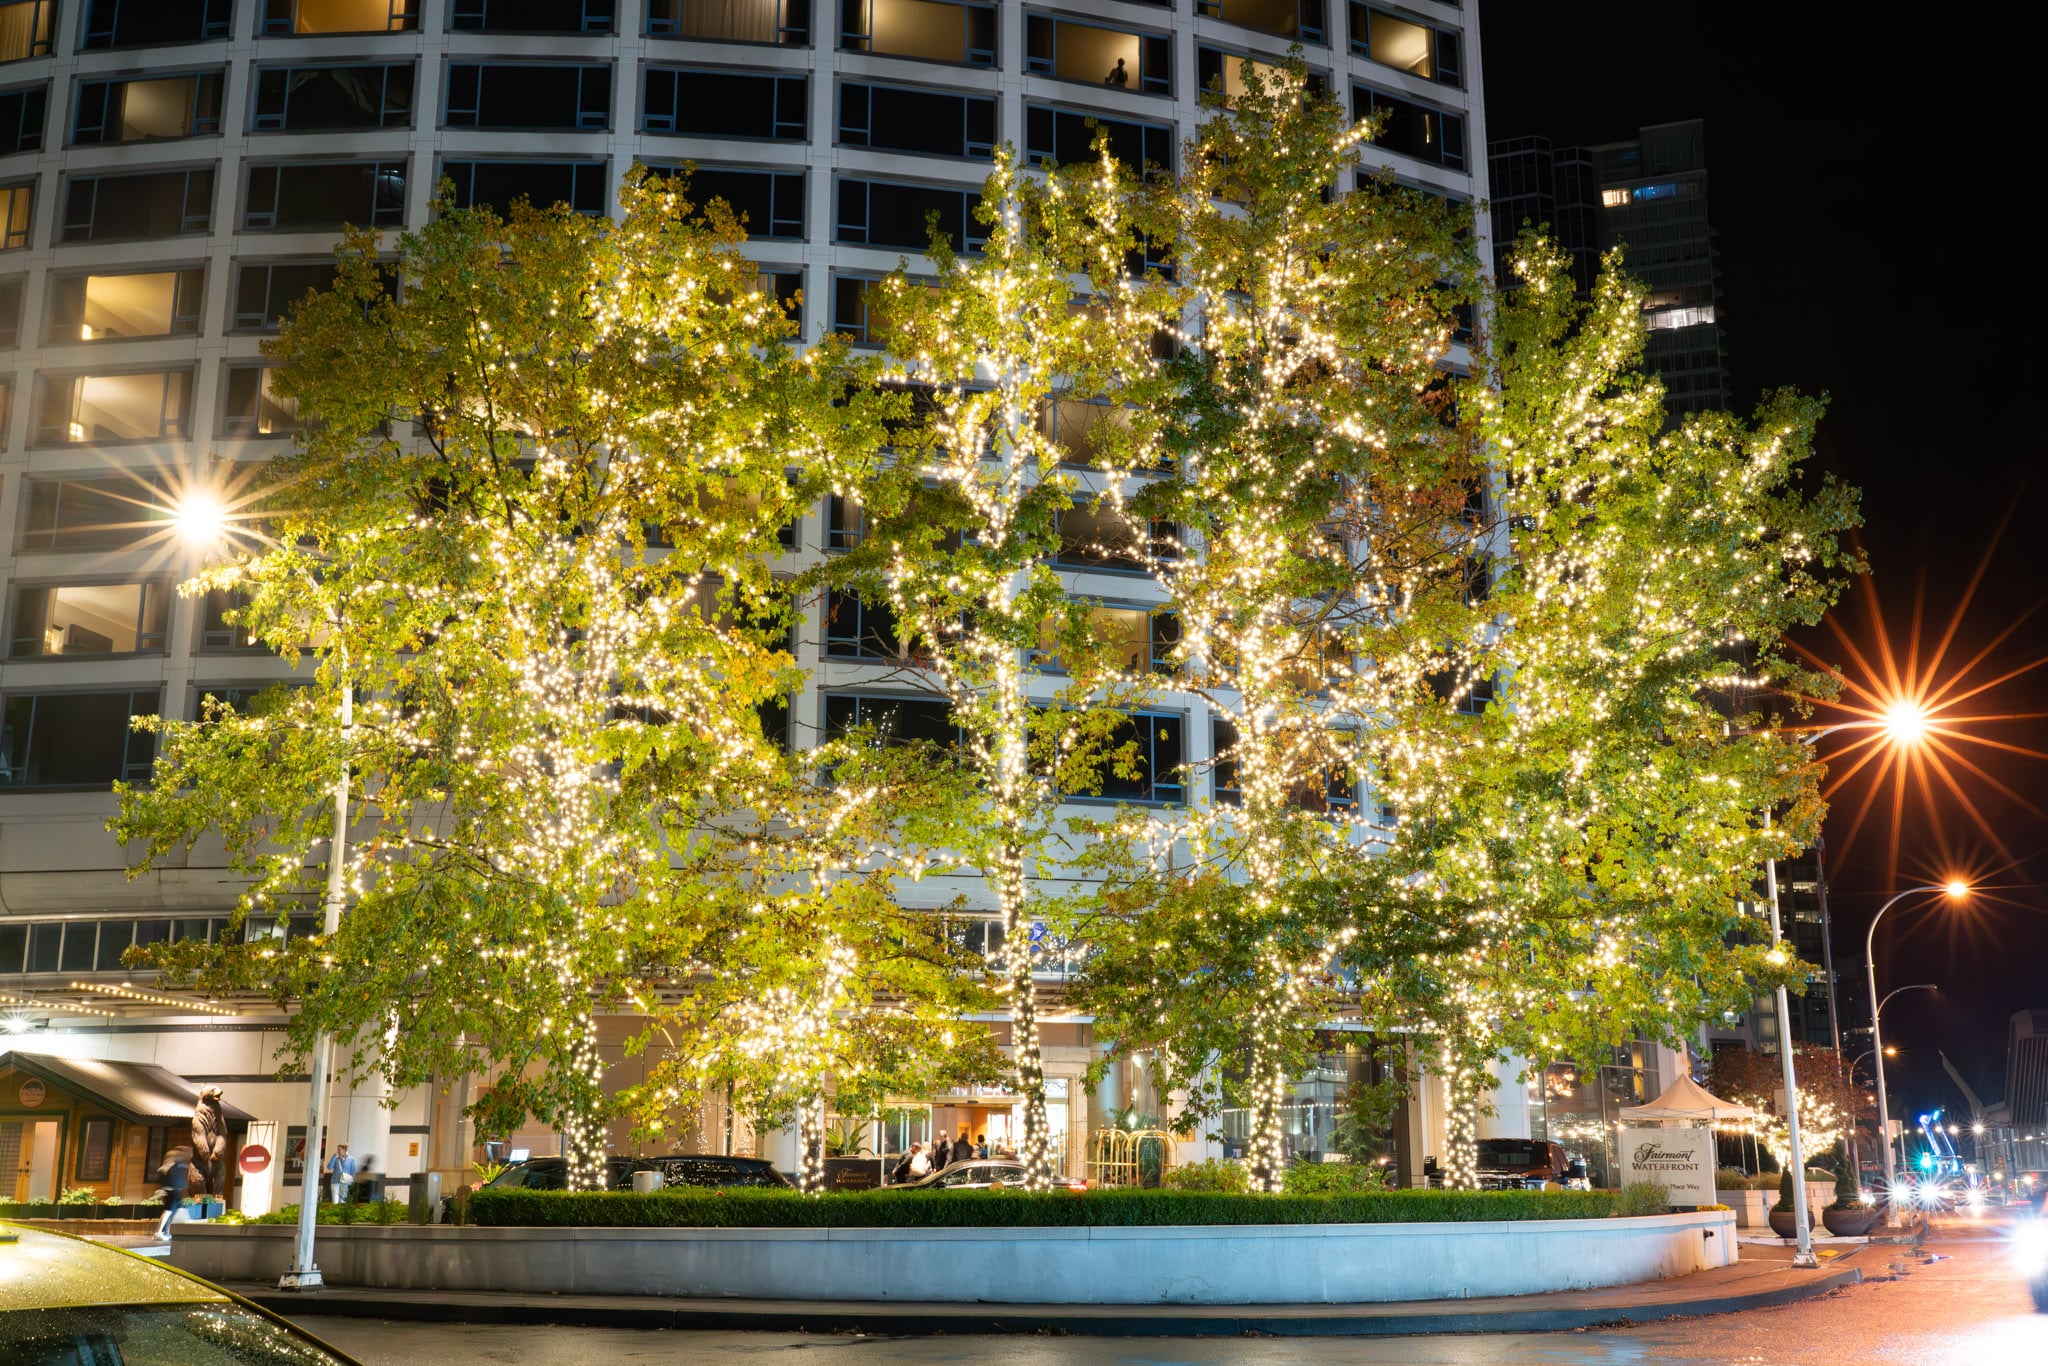 Trees outside a large commercial building are lit up with professional outdoor lighting.